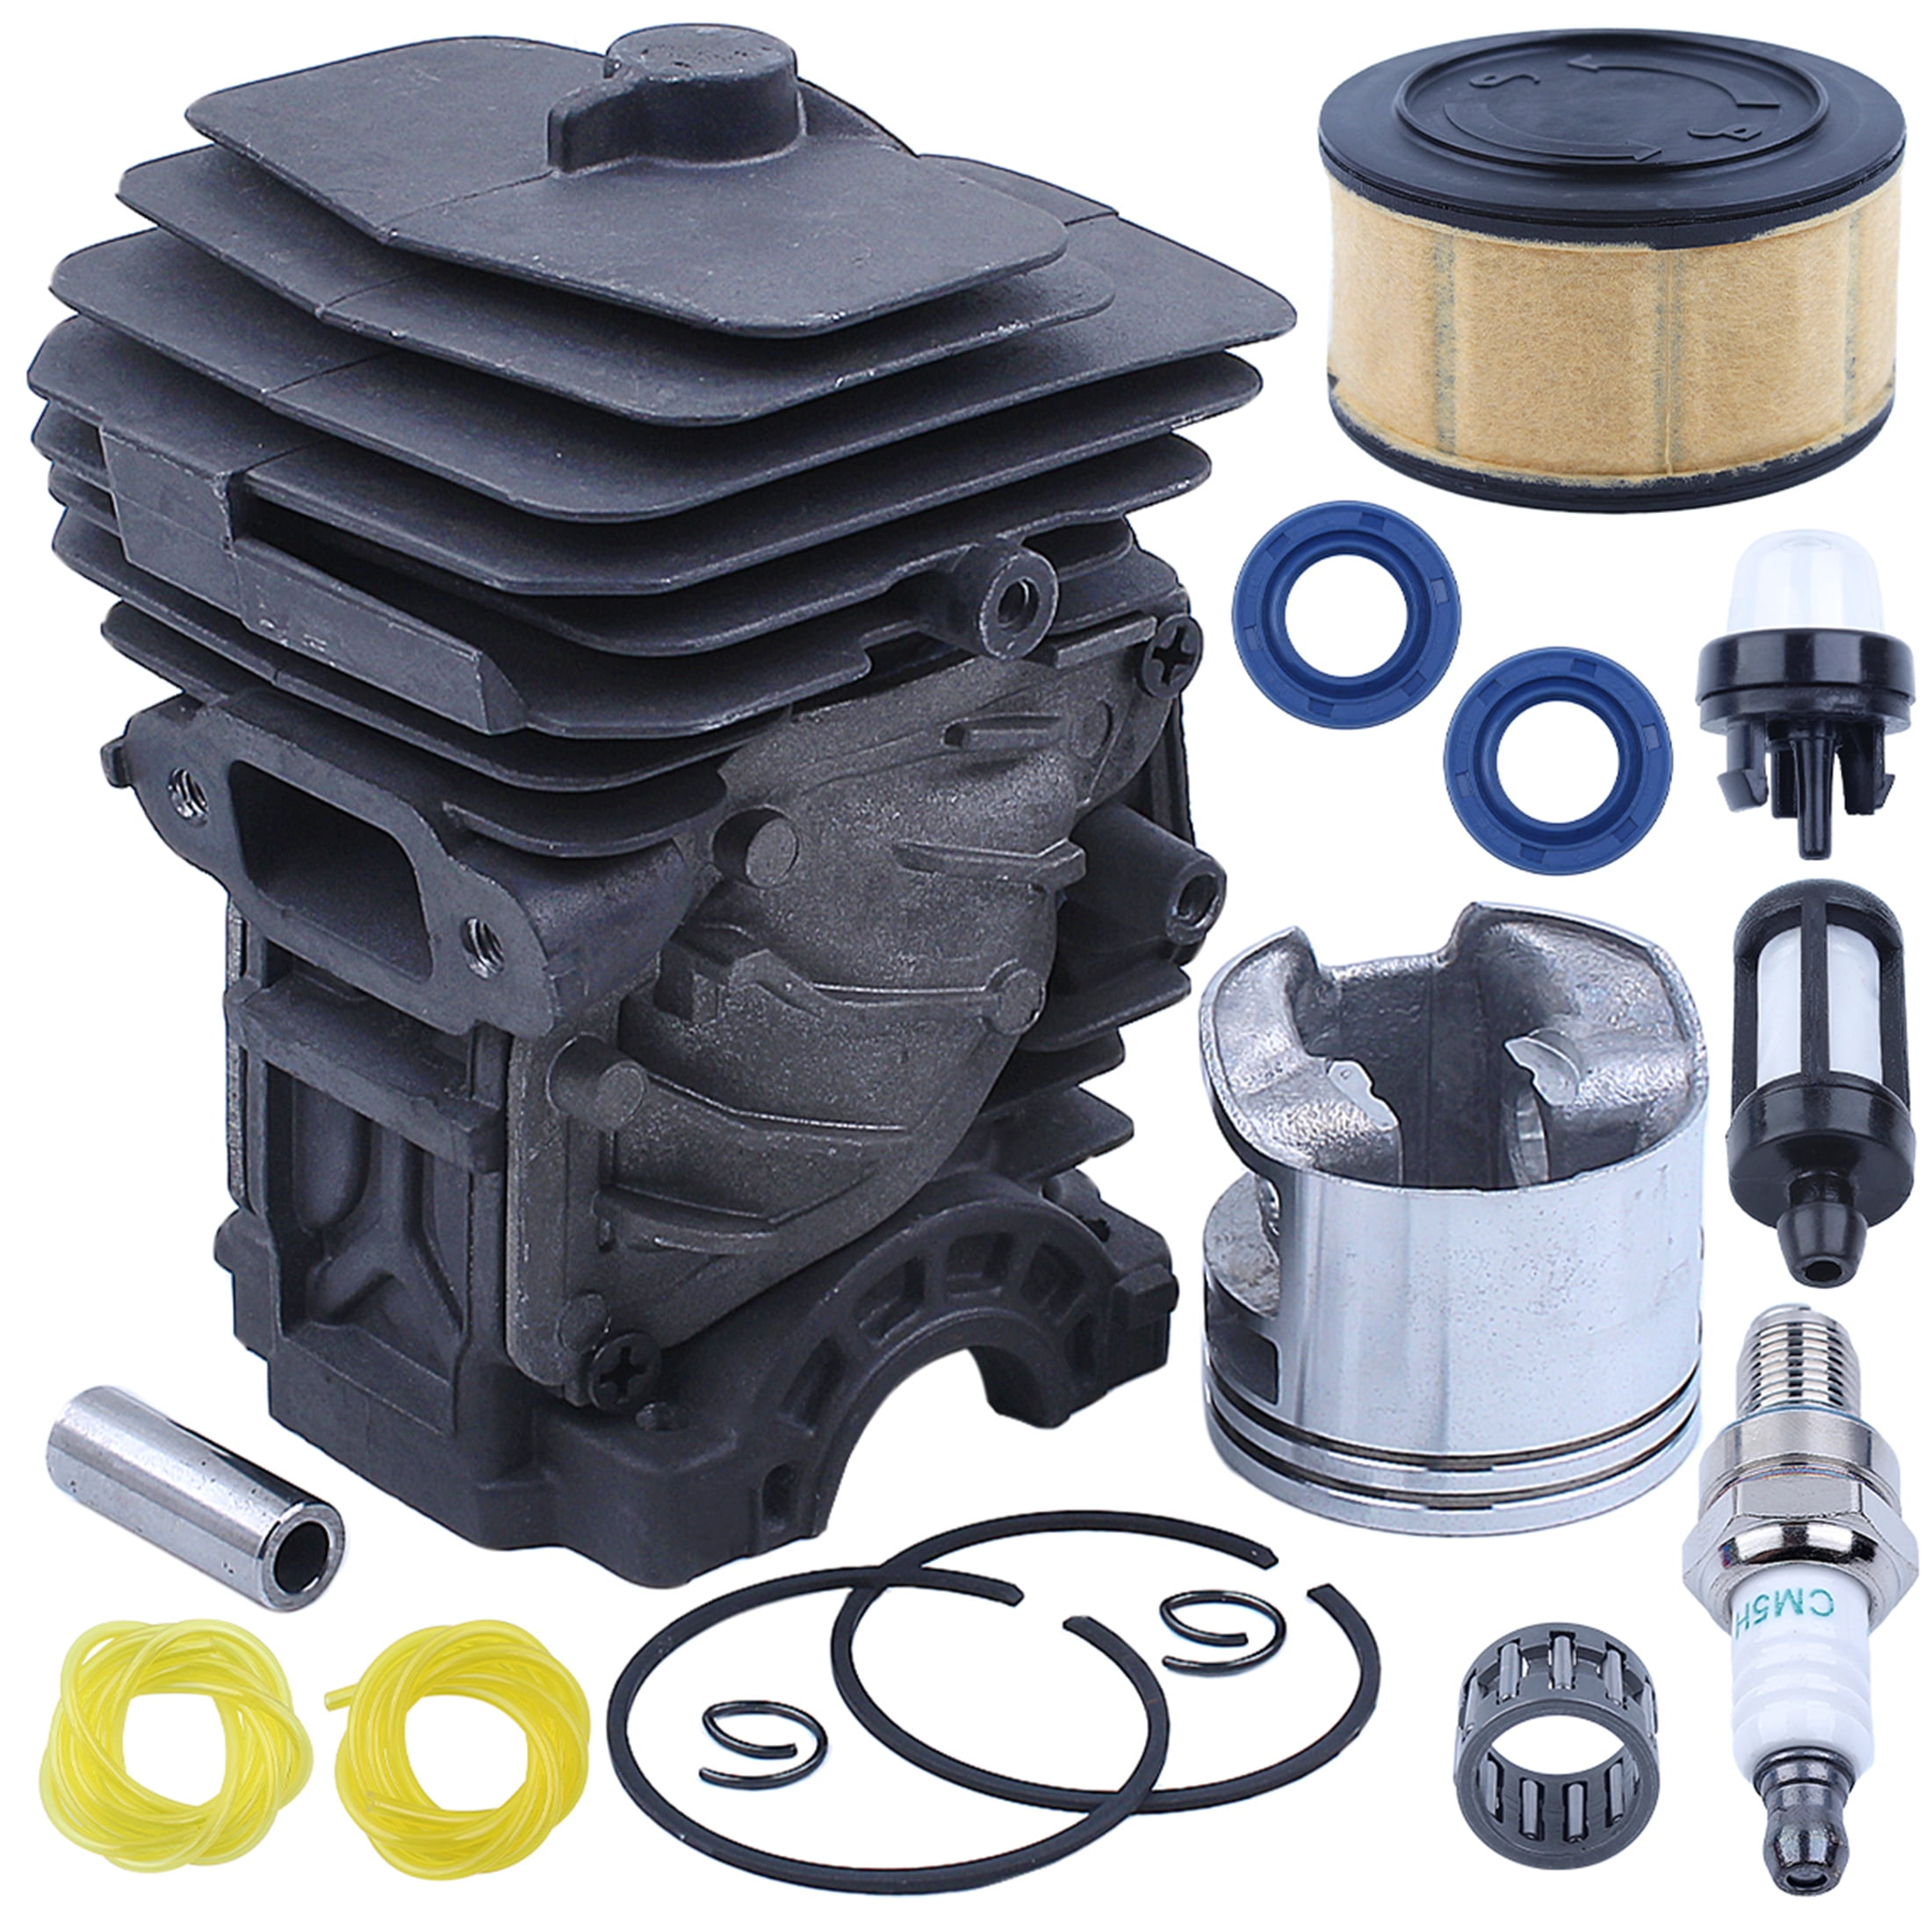 Mtanlo 44mm Cylinder Piston Tune Up Oil Seal Kit For Stihl MS251 Chainsaw  1143 1207 US, Cylinder, Piston, Pin, Ring, Circlip, Air Filter, Oil Seal